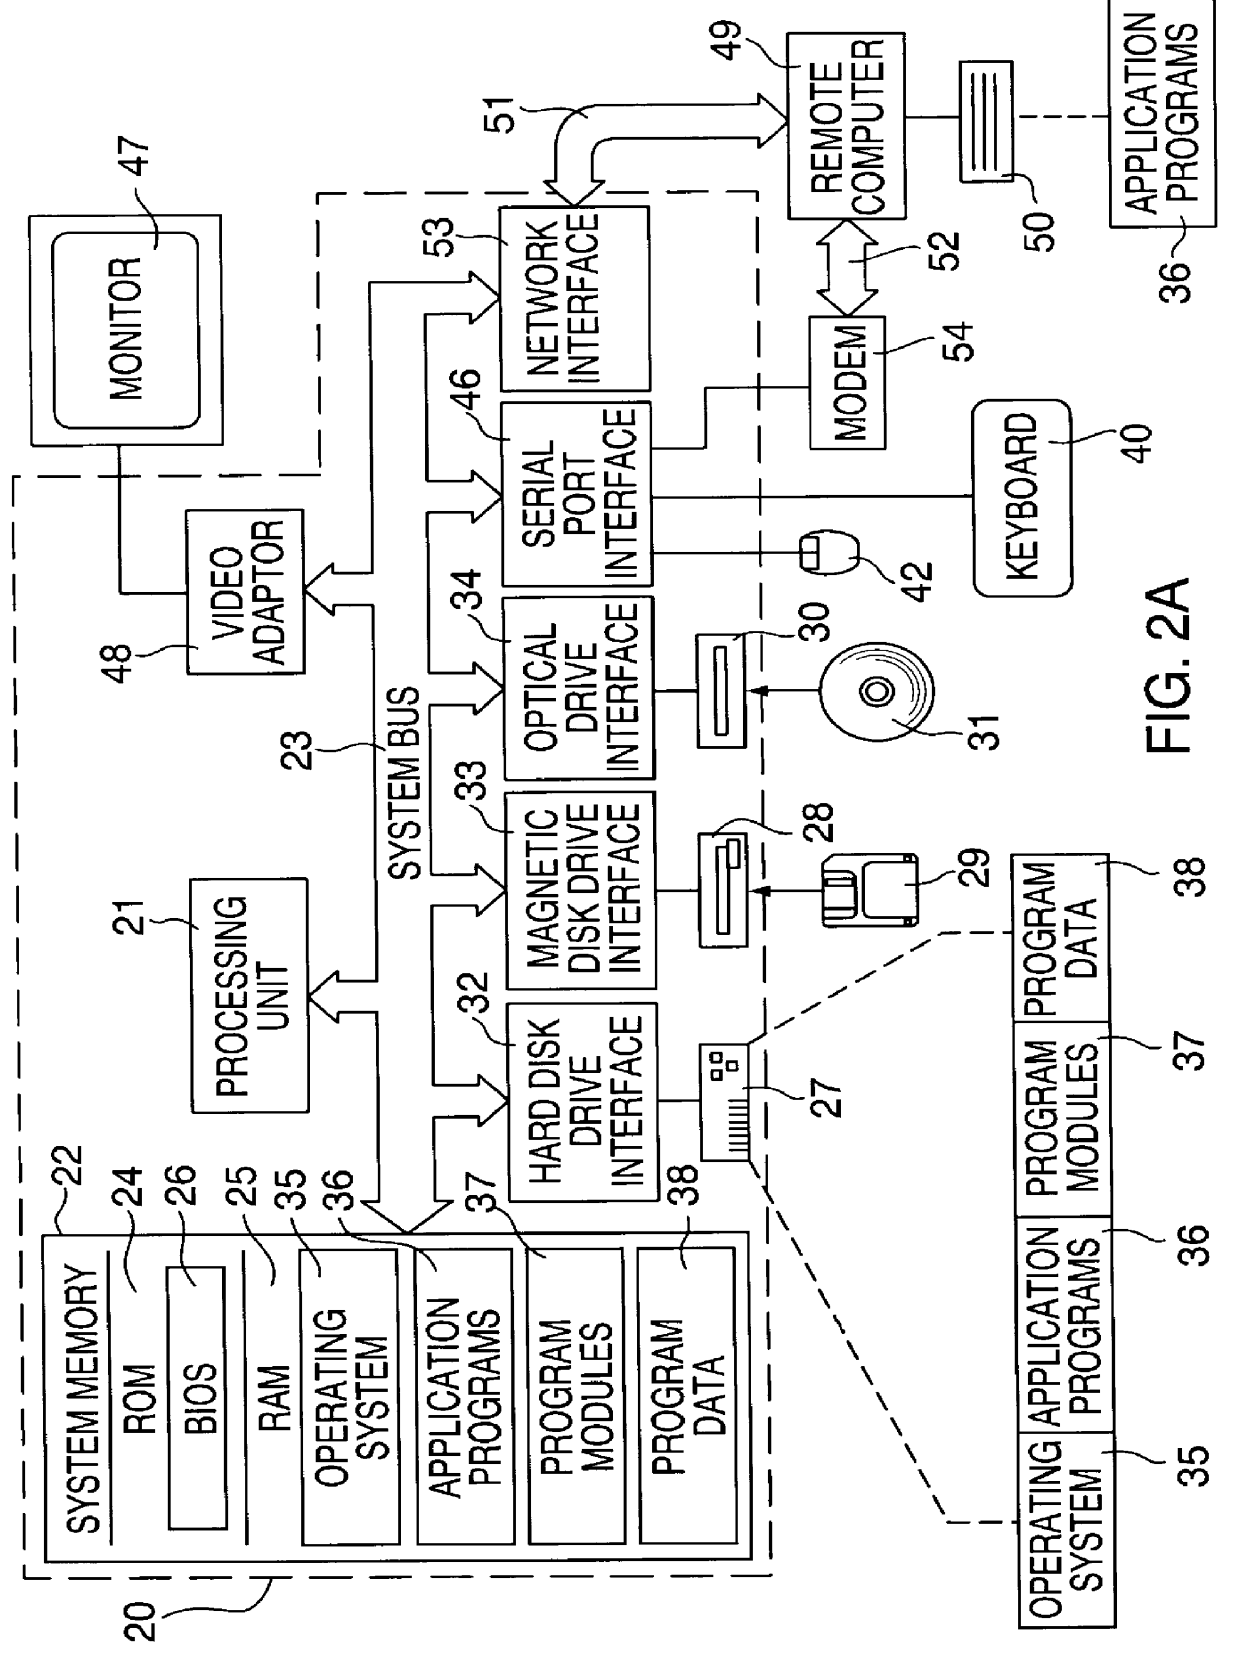 Focal length estimation method and apparatus for construction of panoramic mosaic images